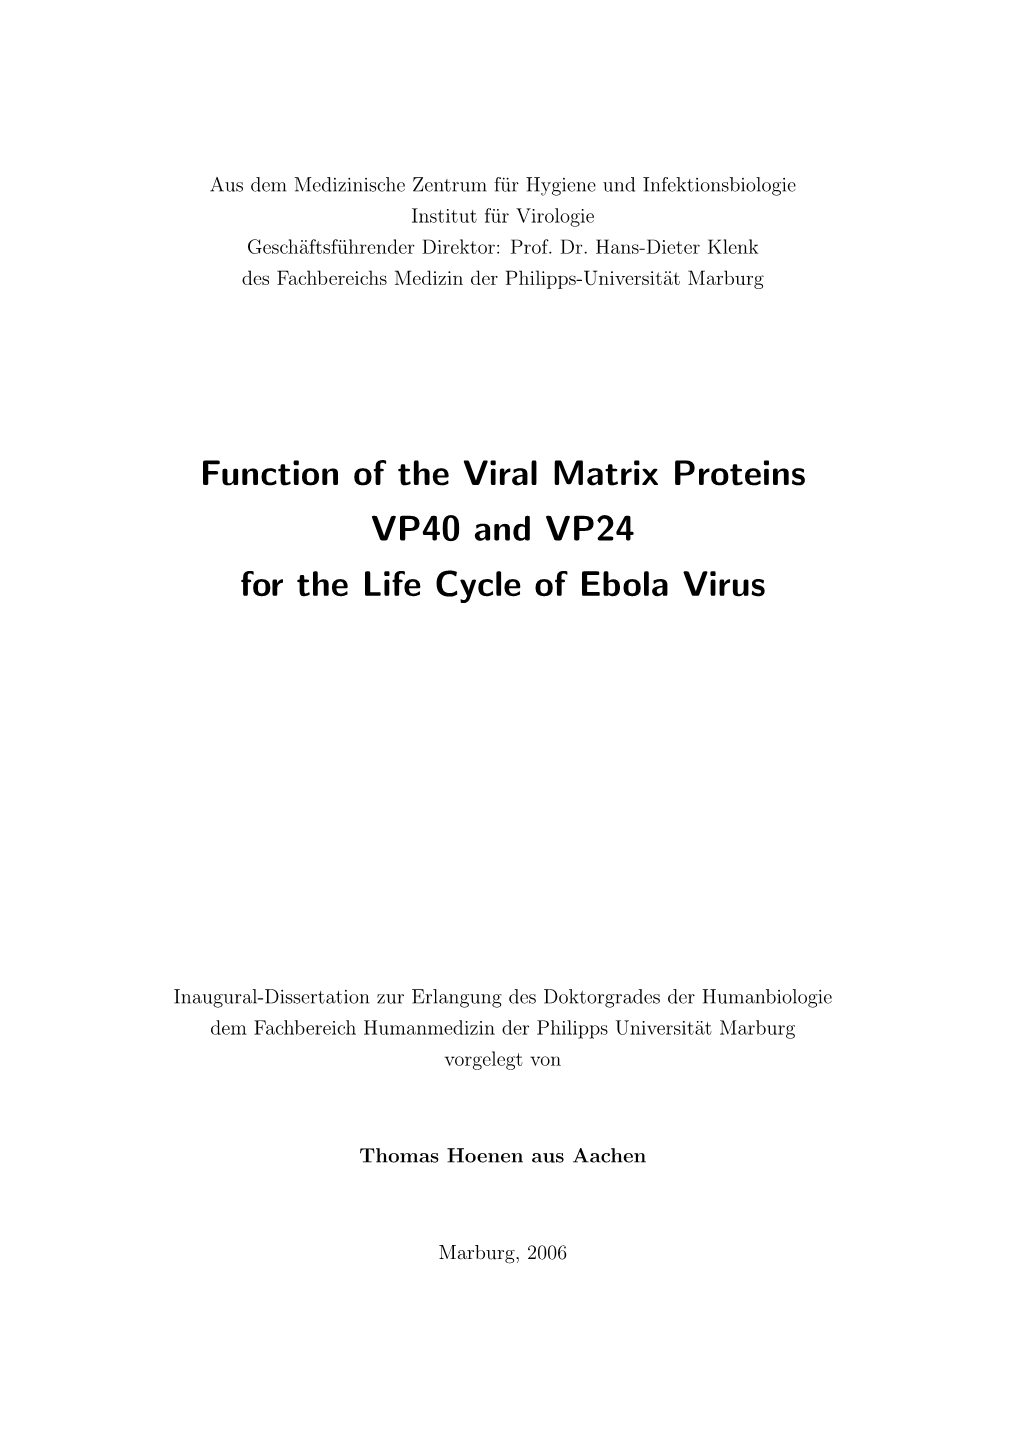 Function of the Viral Matrix Proteins VP40 and VP24 for the Life Cycle of Ebola Virus